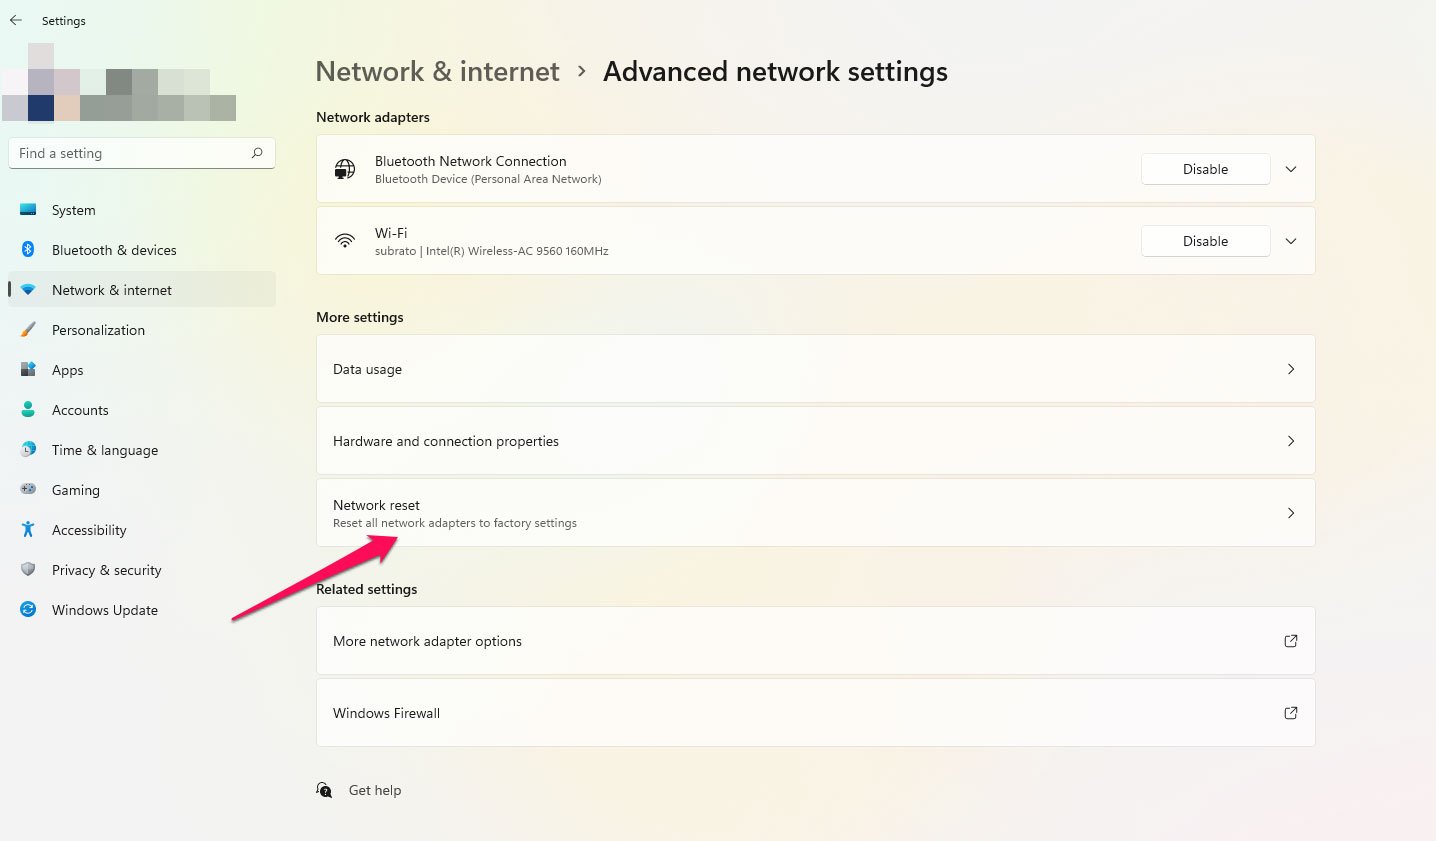 Reset Your Network Settings